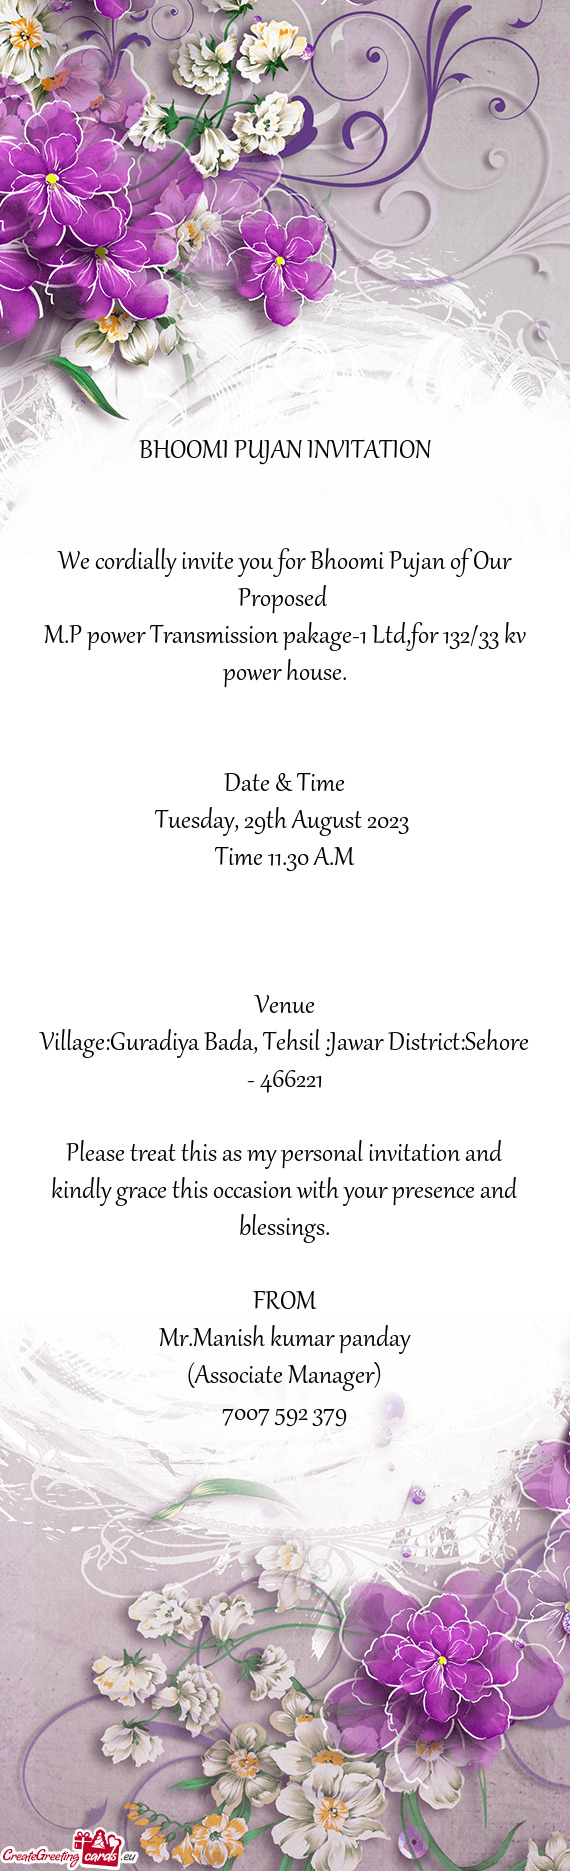 We cordially invite you for Bhoomi Pujan of Our Proposed